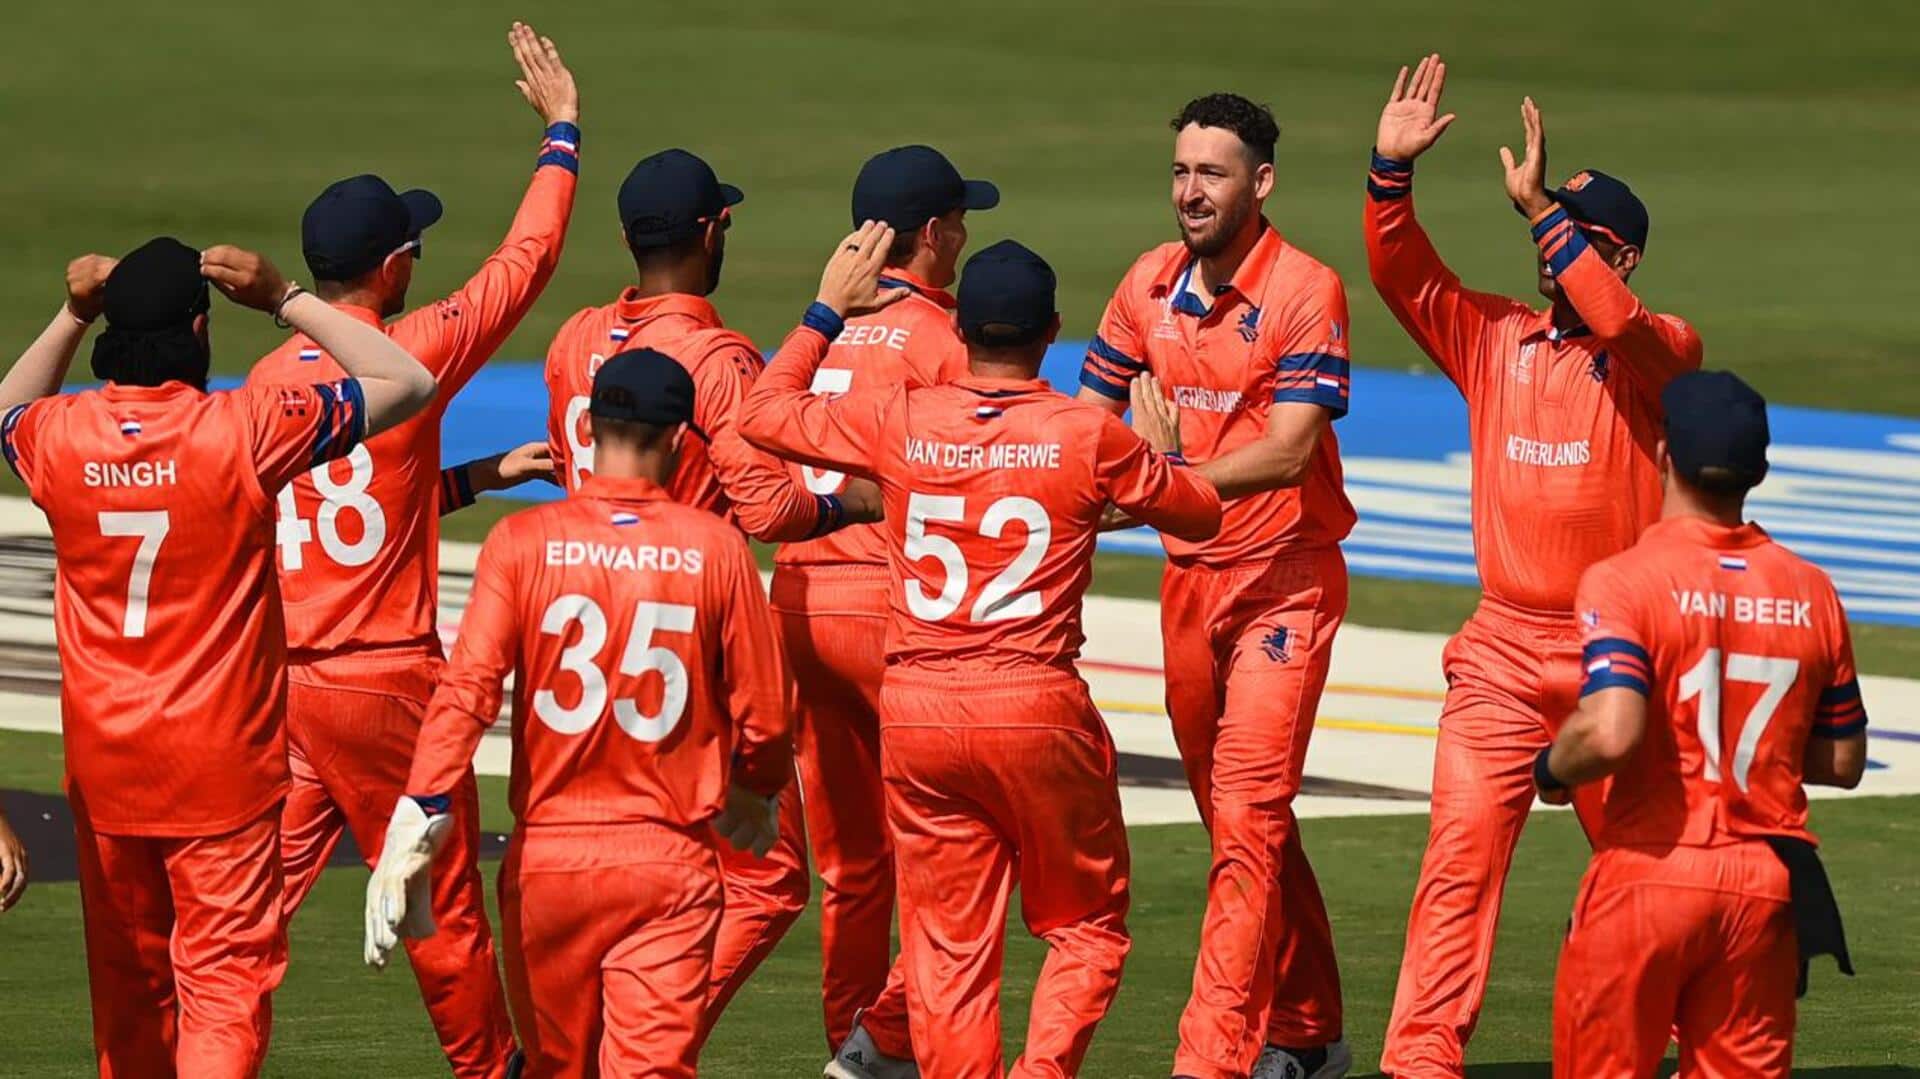 ICC Cricket World Cup, Netherlands vs Bangladesh: Statistical Preview